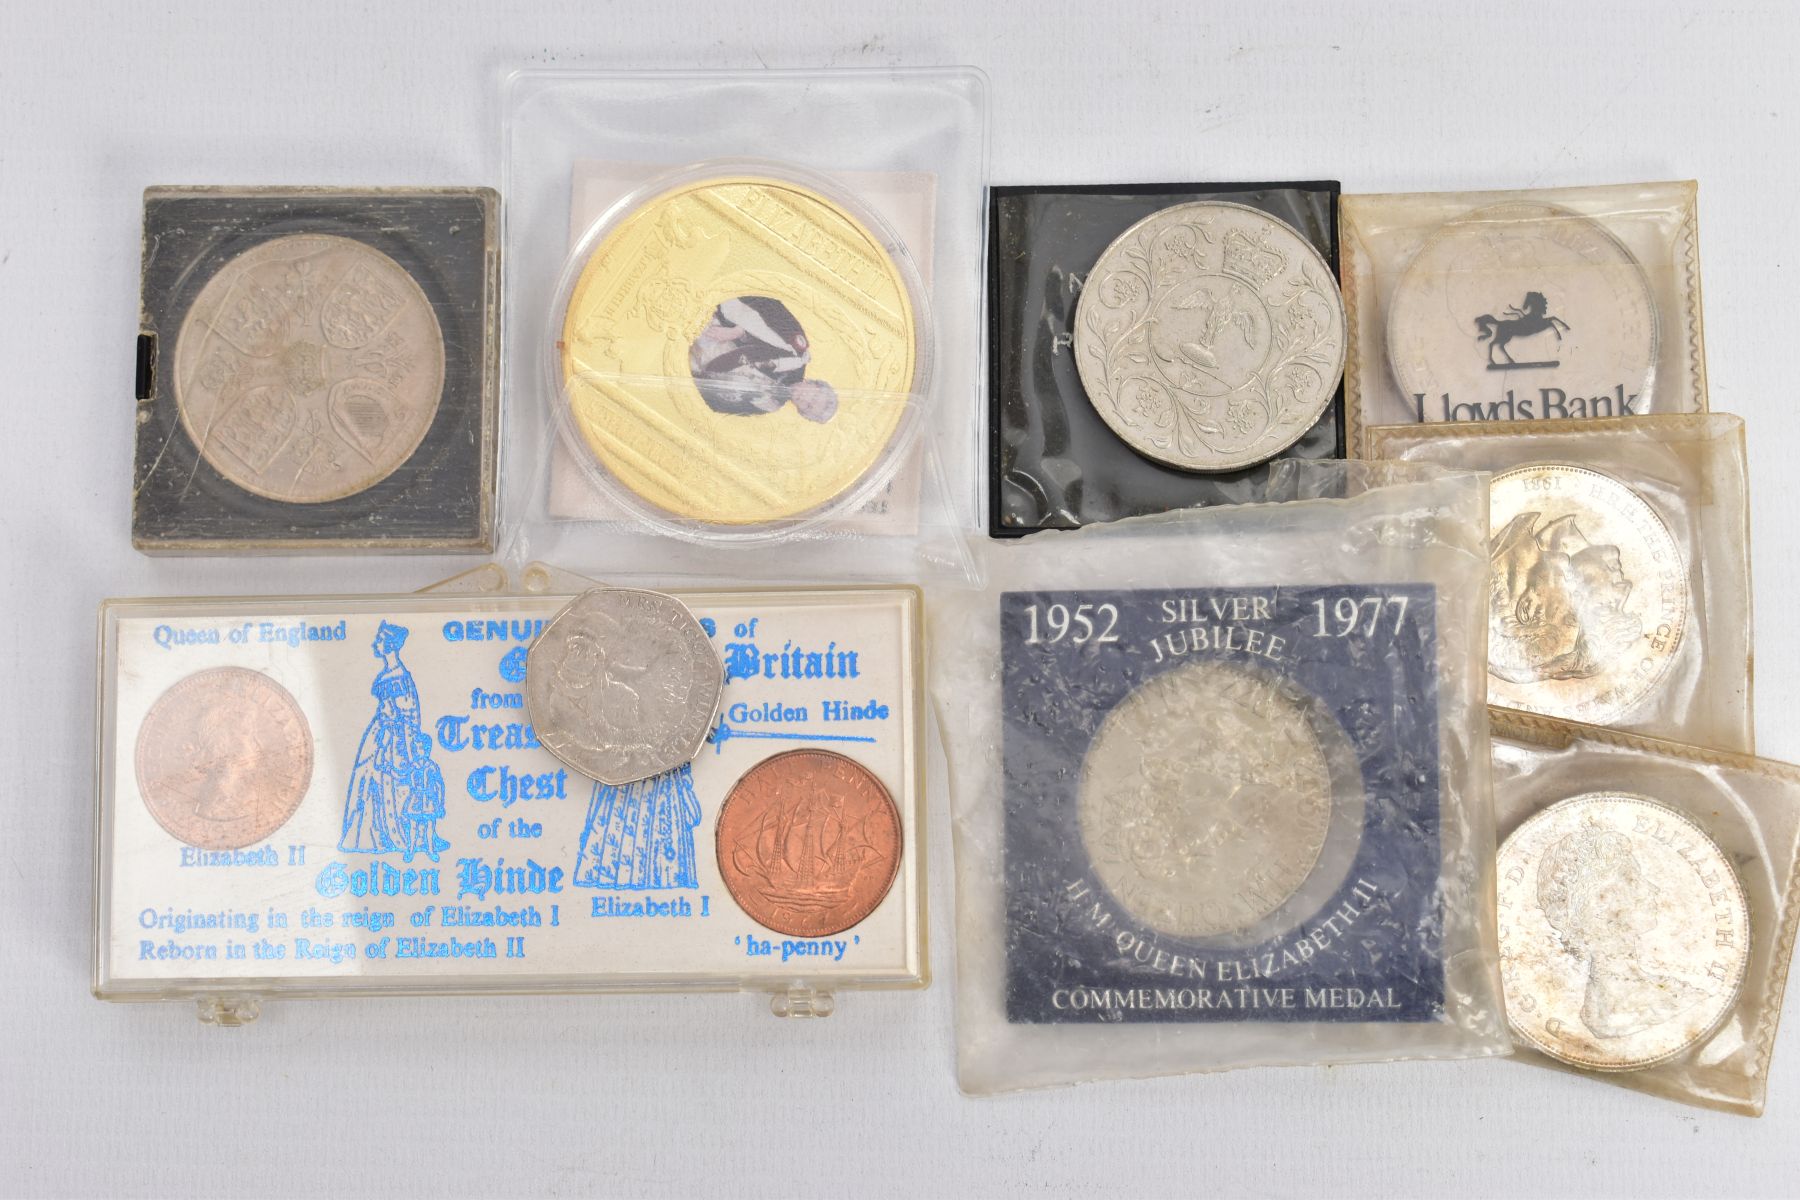 A SMALL AMOUNT OF COMMEMORATIVES to include a large gilded Queen Elizabeth Great British sovereigns